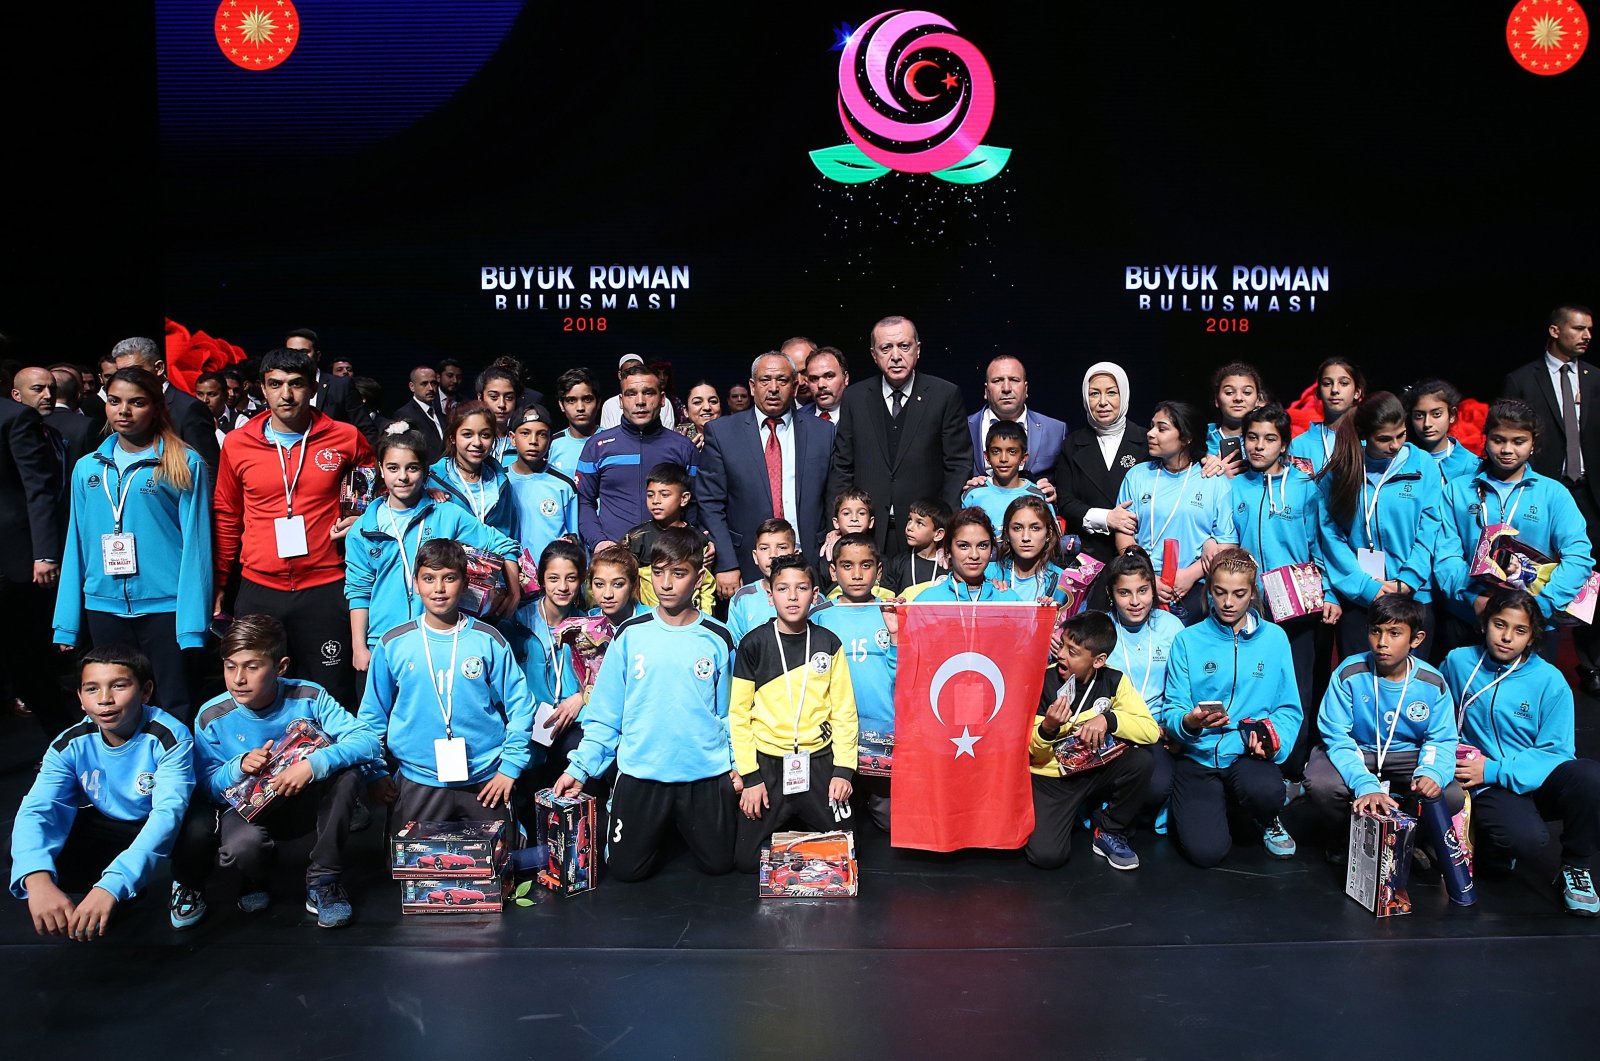 President Recep Tayyip Erdoğan poses with Romani citizens at a convention at the Presidential Complex, in the capital Ankara, Türkiye, April 12, 2018. (İHA Photo)